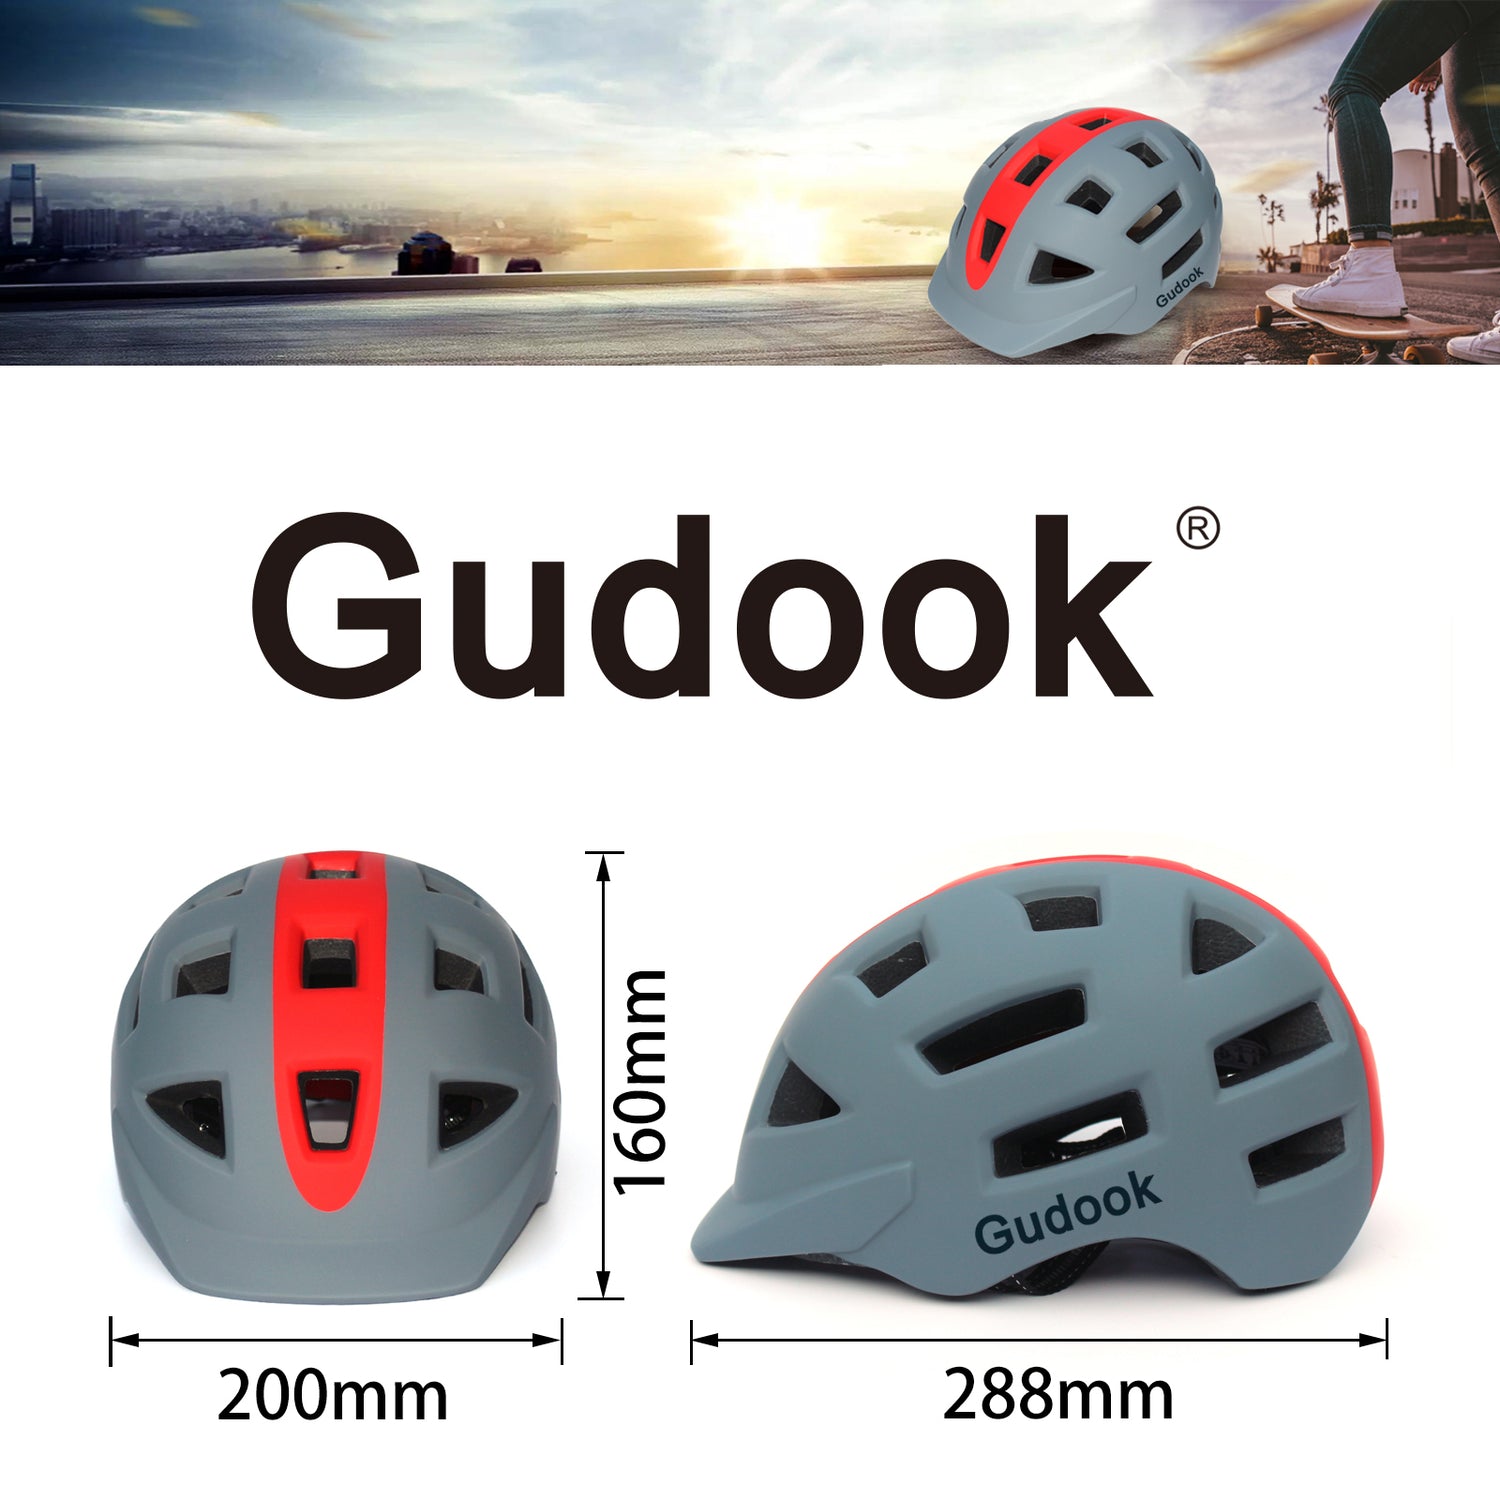 Gudook Manufacturer Helmets KY-050 for Outdoor Sports Scooters and Skateboard